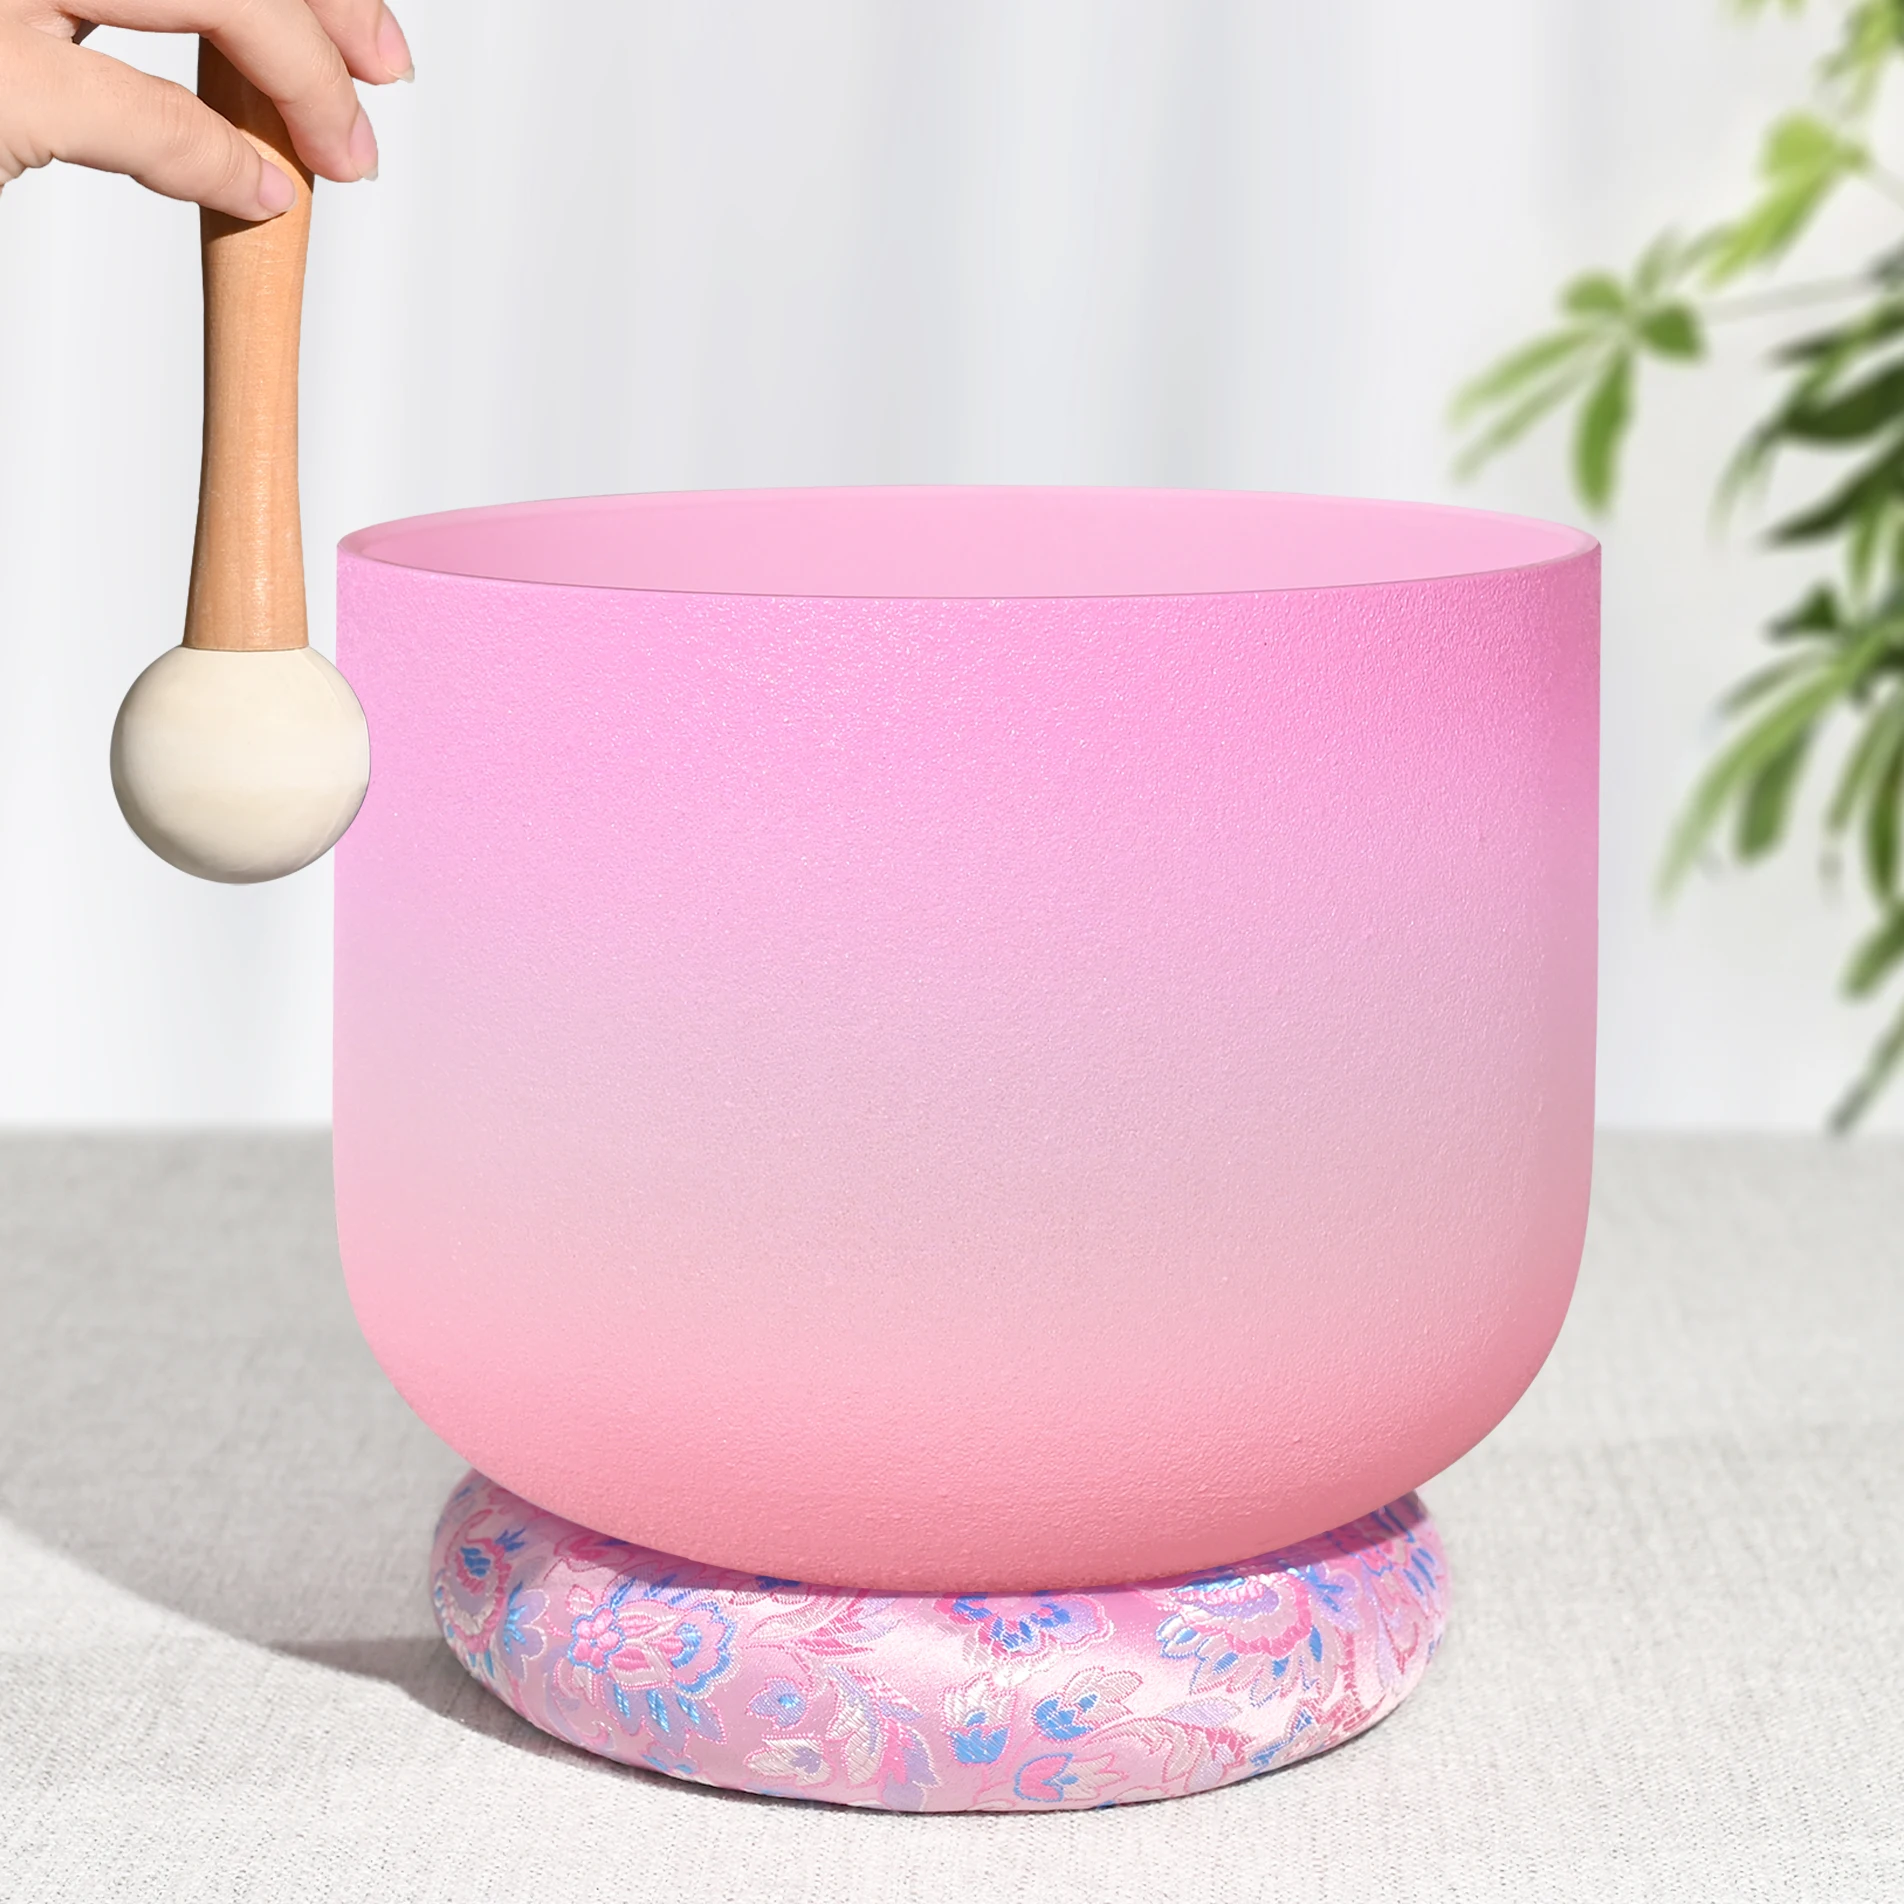 CVNC 8 Inch B or F Note Candy Colored Frosted Quartz Crystal Singing Bowl for Sound Healing Meditation Instrument enlarge